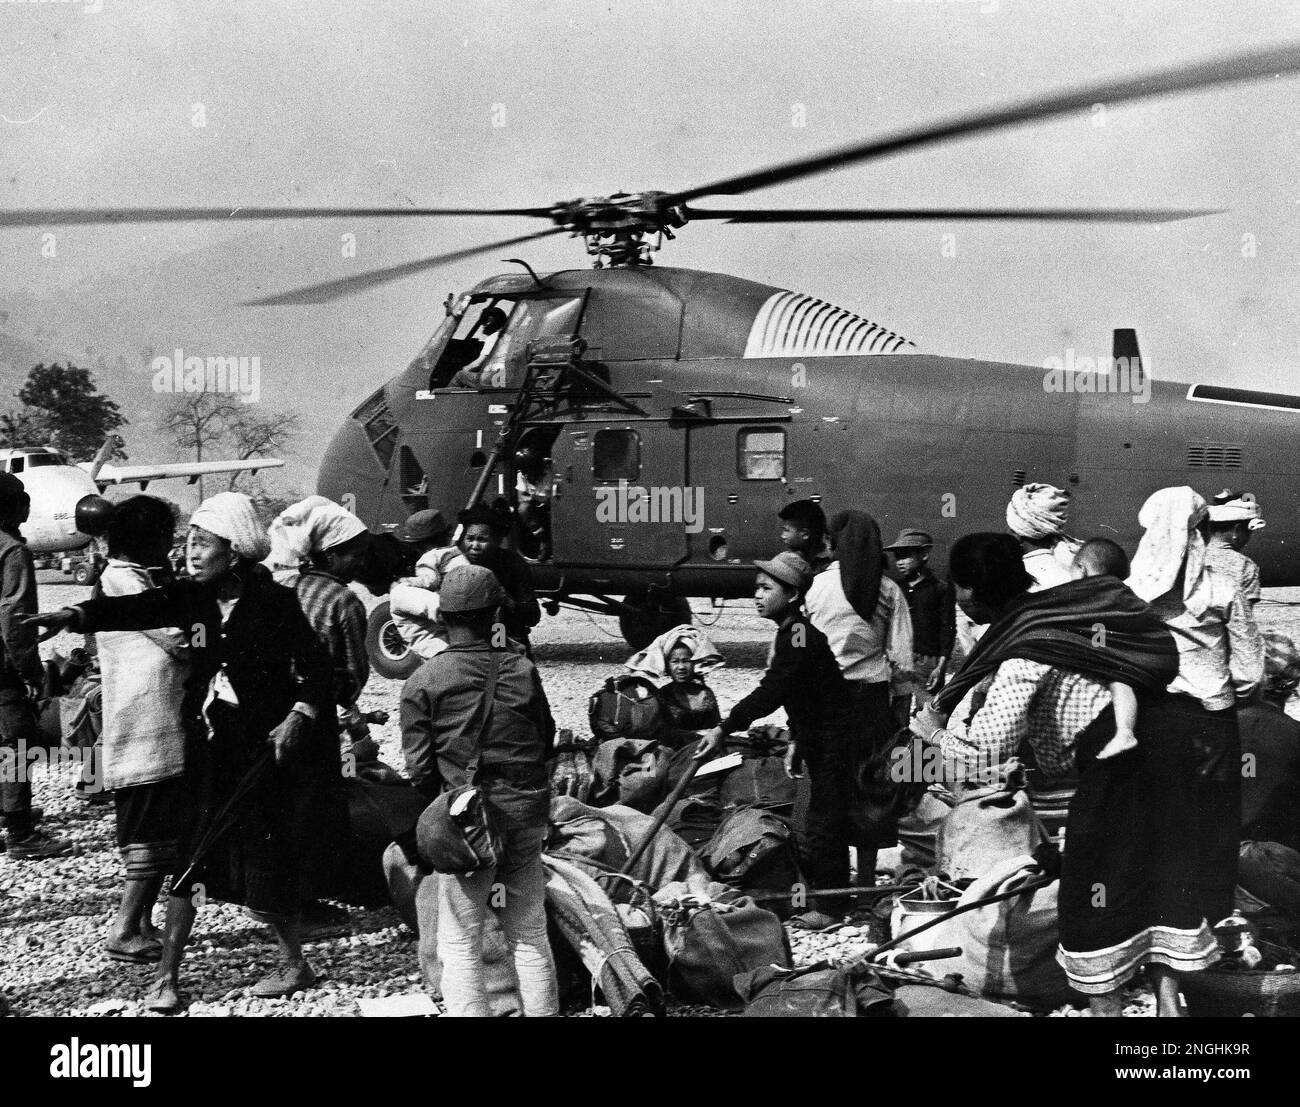 Meo refugees crowd around an Air America Helicopter, piloted by U.S.  civilian personnel, during the evacuation of Sam Thong base southwest of  the Plain of Jars, Laos on Tuesday, March 18, 1970. (